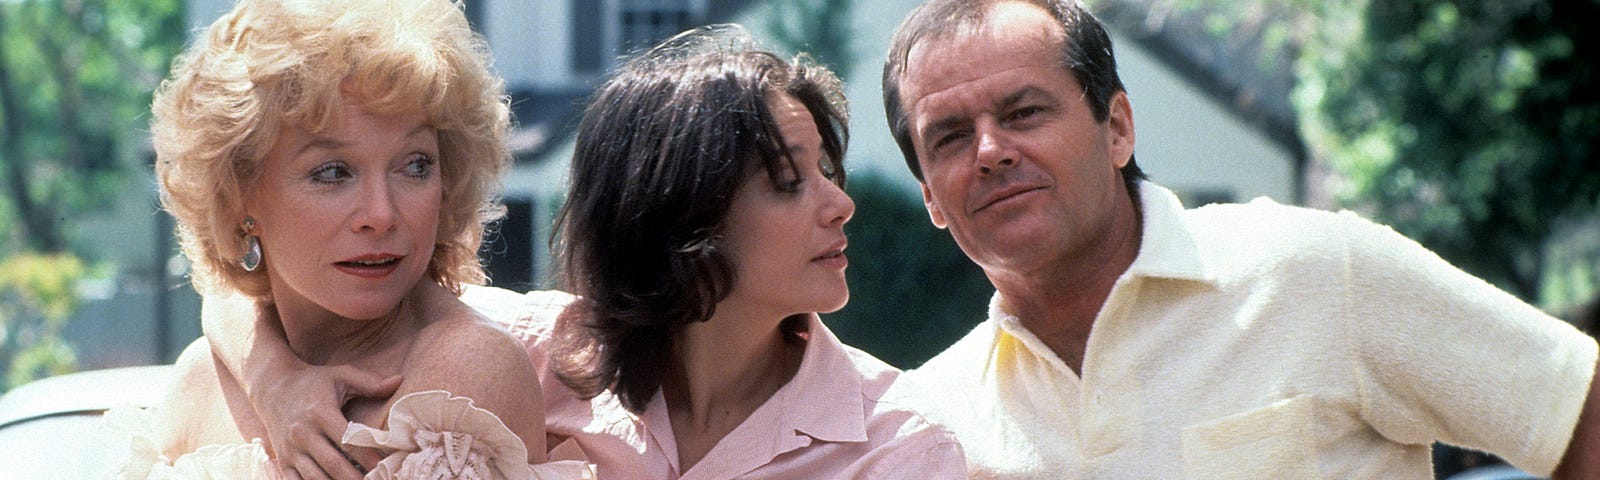 A still of Shirley MacLaine, Debra Winger and Jack Nicholson in Terms of Endearment